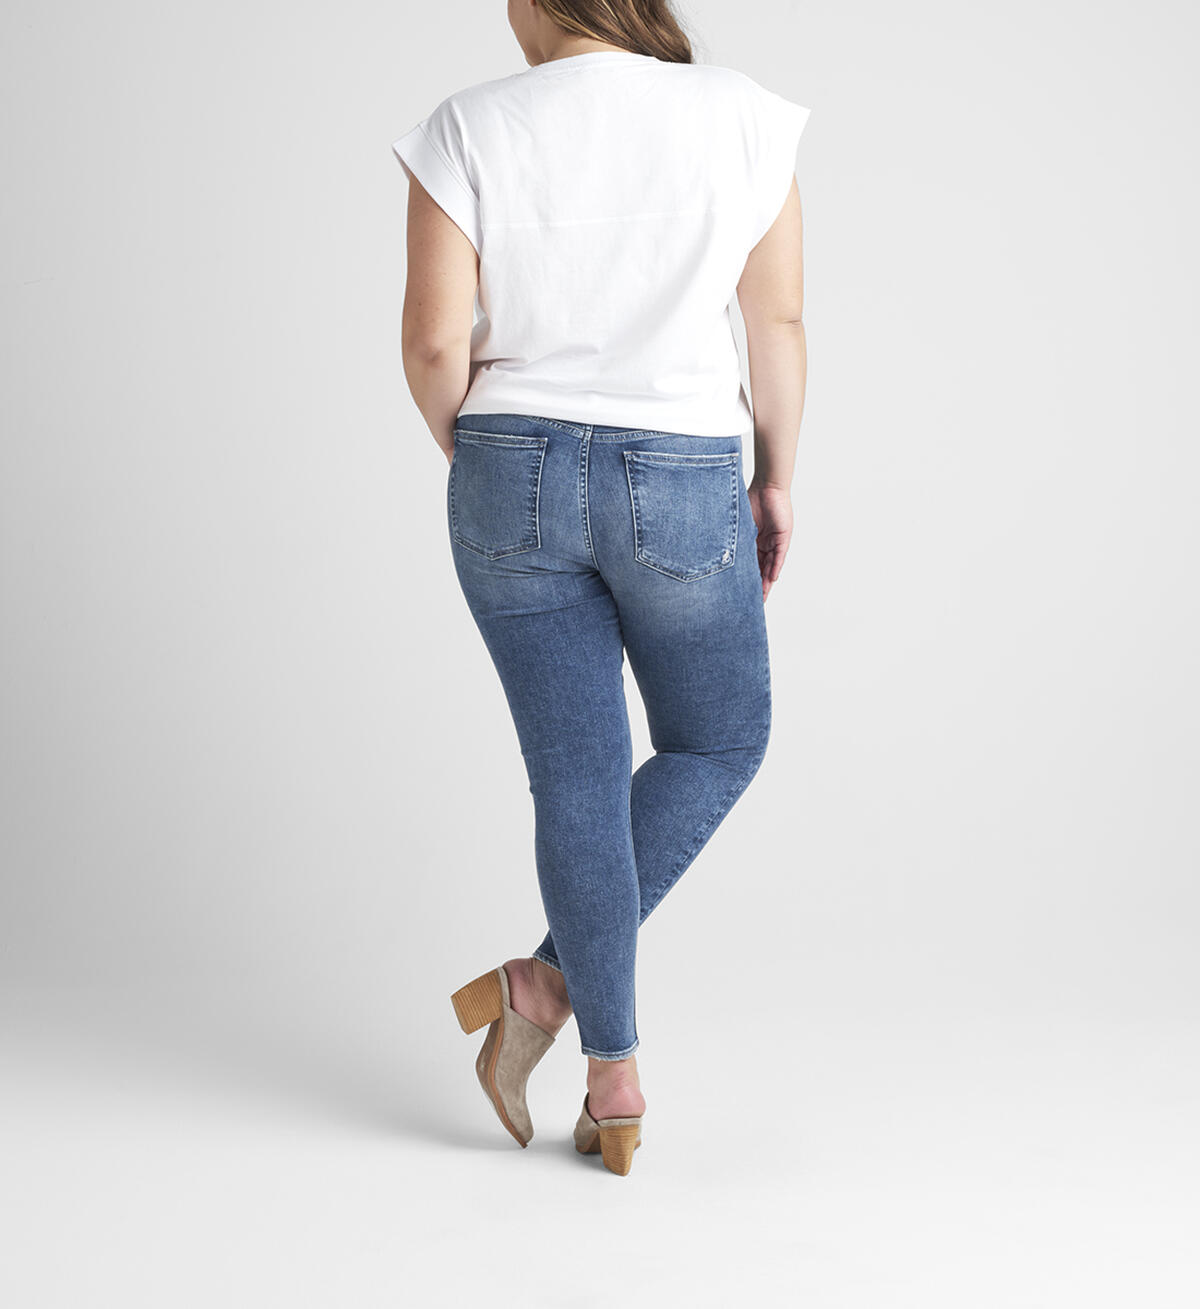 Most Wanted Mid Rise Skinny Jeans Plus Size, , hi-res image number 1